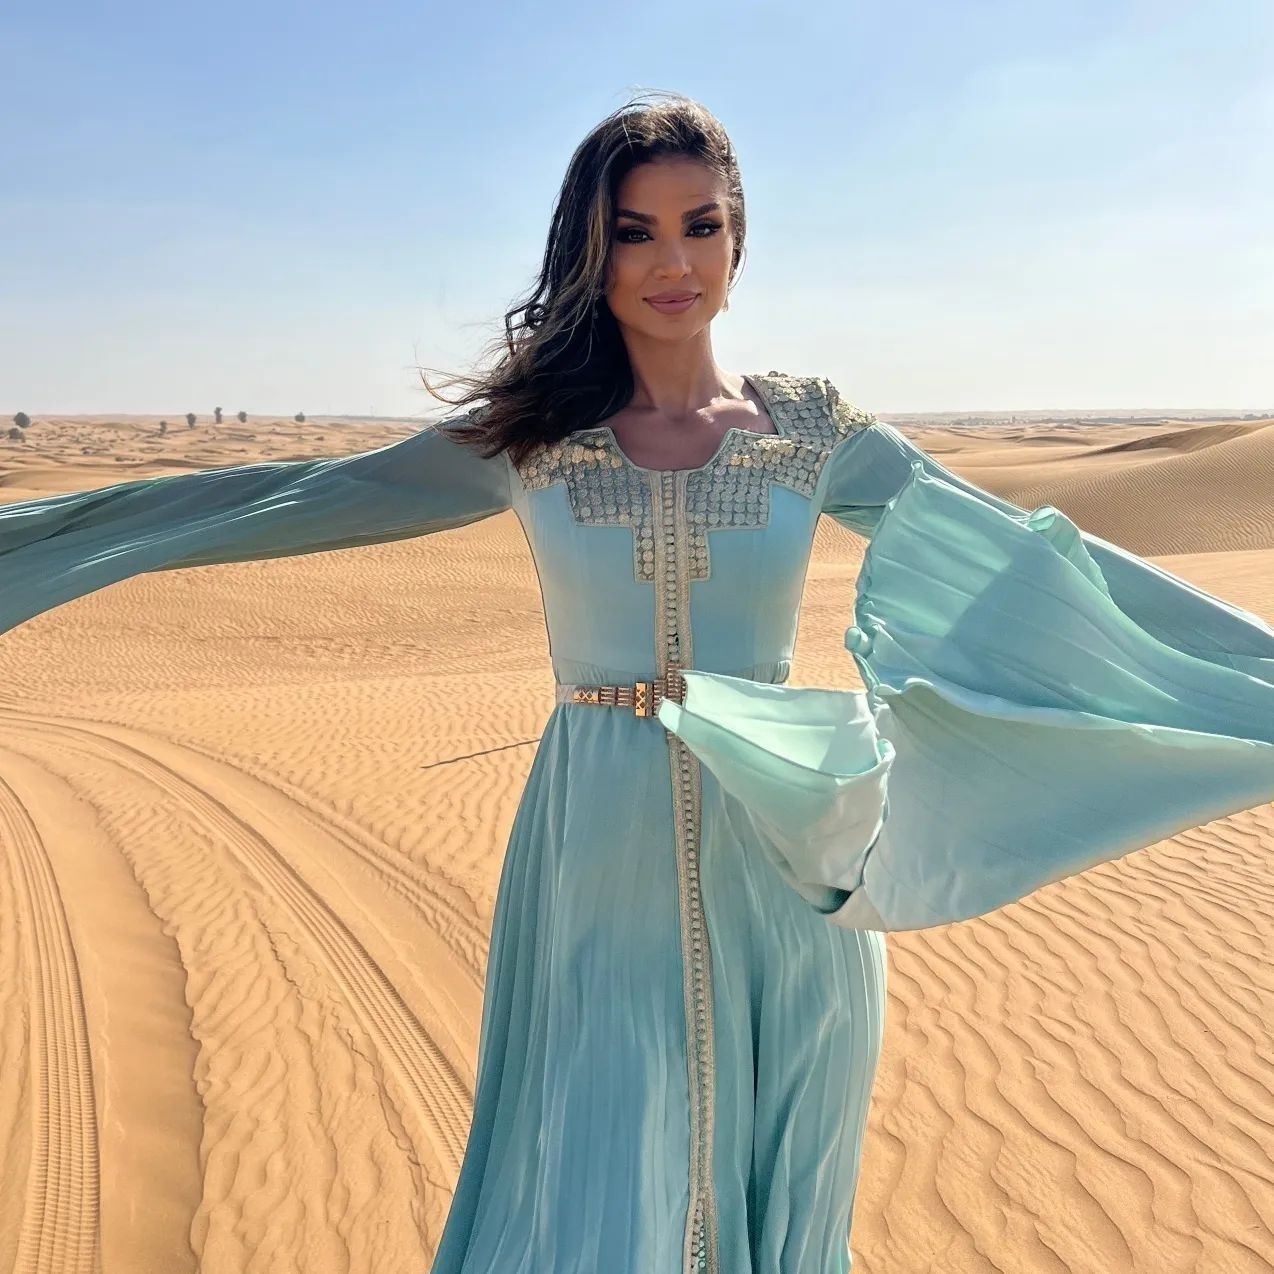 Dubai Bling cast: Inside the fashionable lives of the divas from the  Netflix series